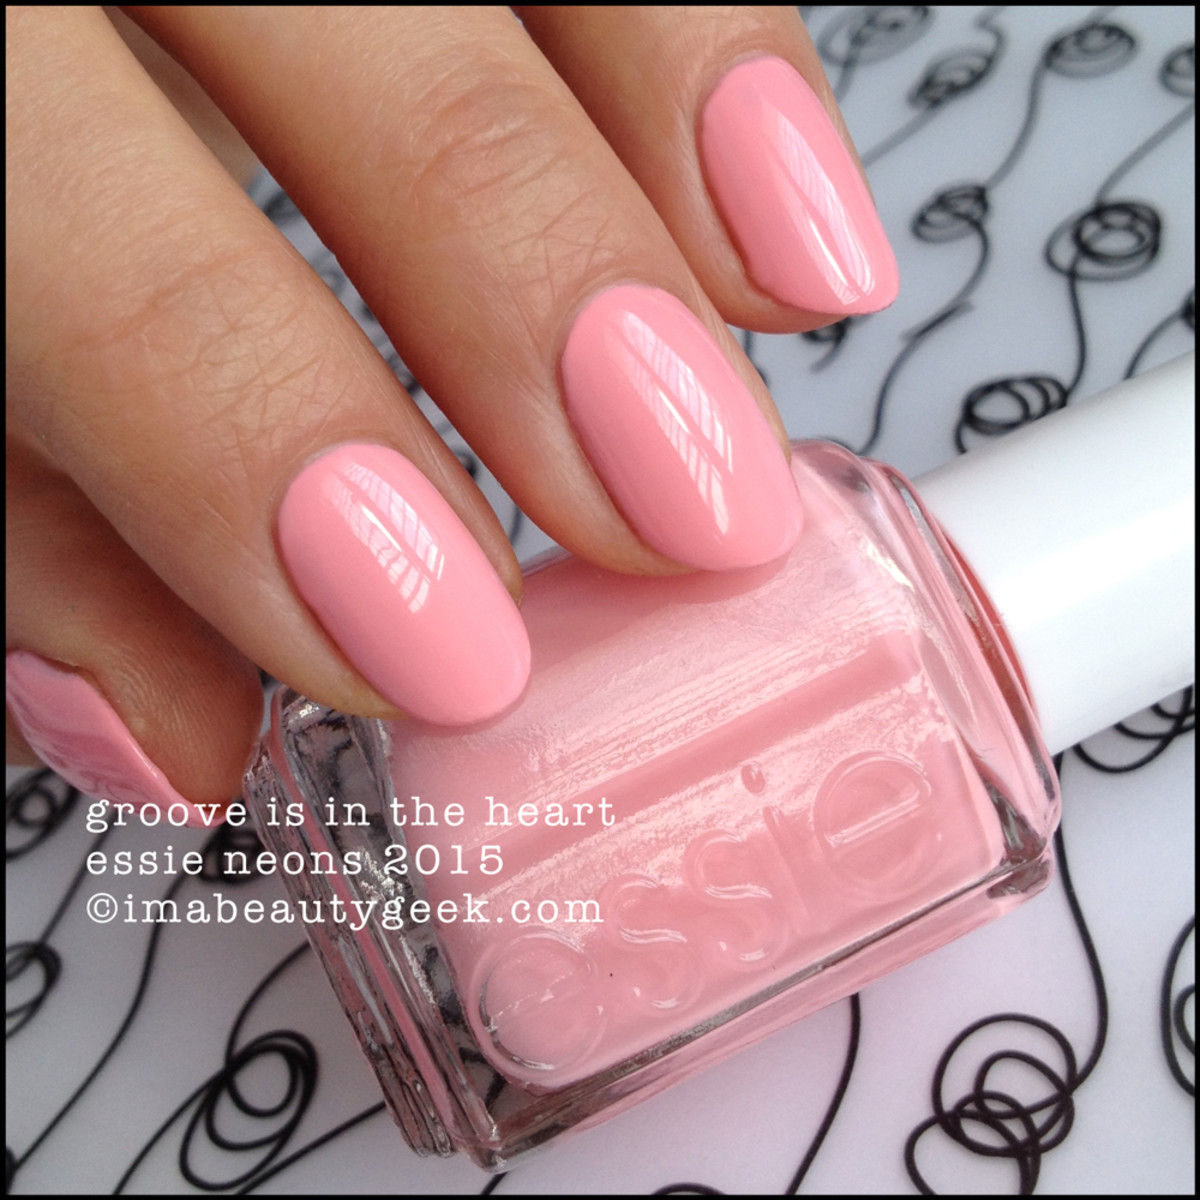 Essie Neons 2015 Groove is in the Heart Manigeek Swatches